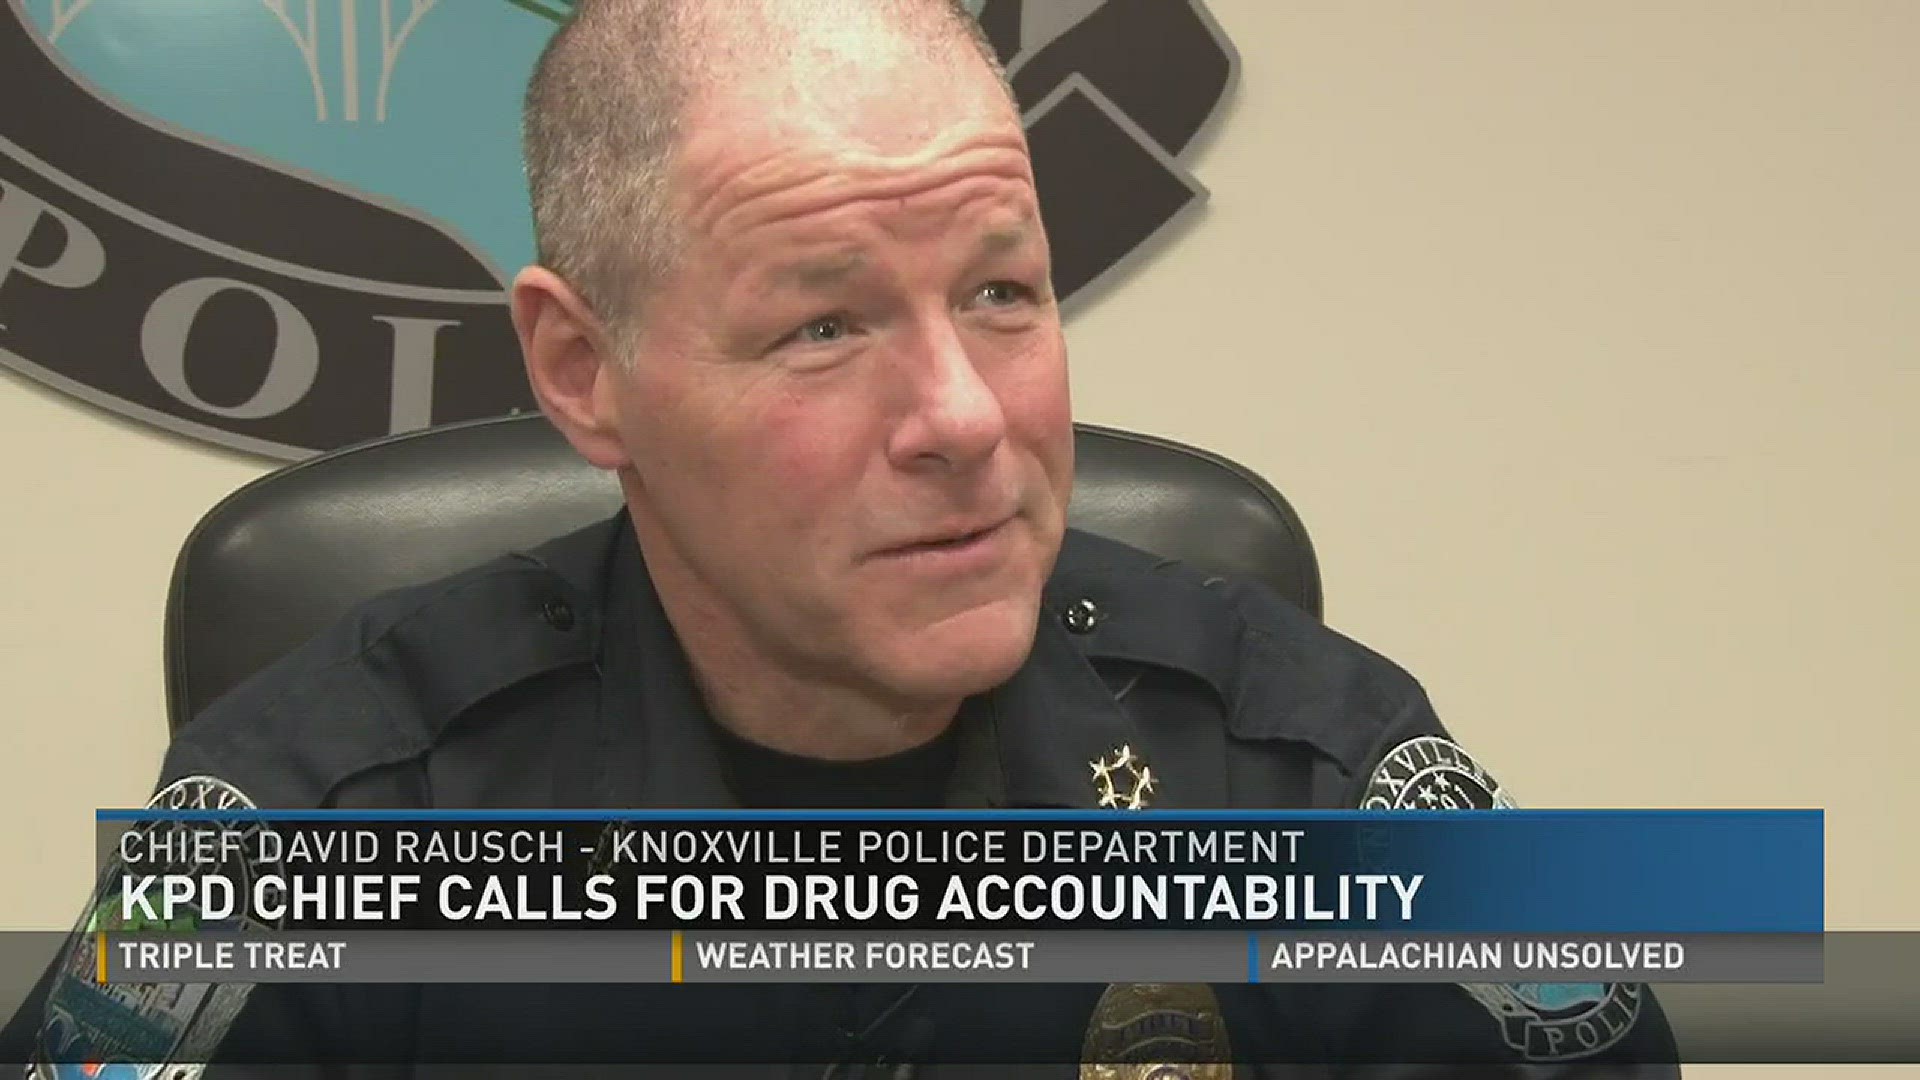 Feb. 10, 2017: Knoxville Police Chief David Rausch spoke from the heart about his views on the opioid epedimic.